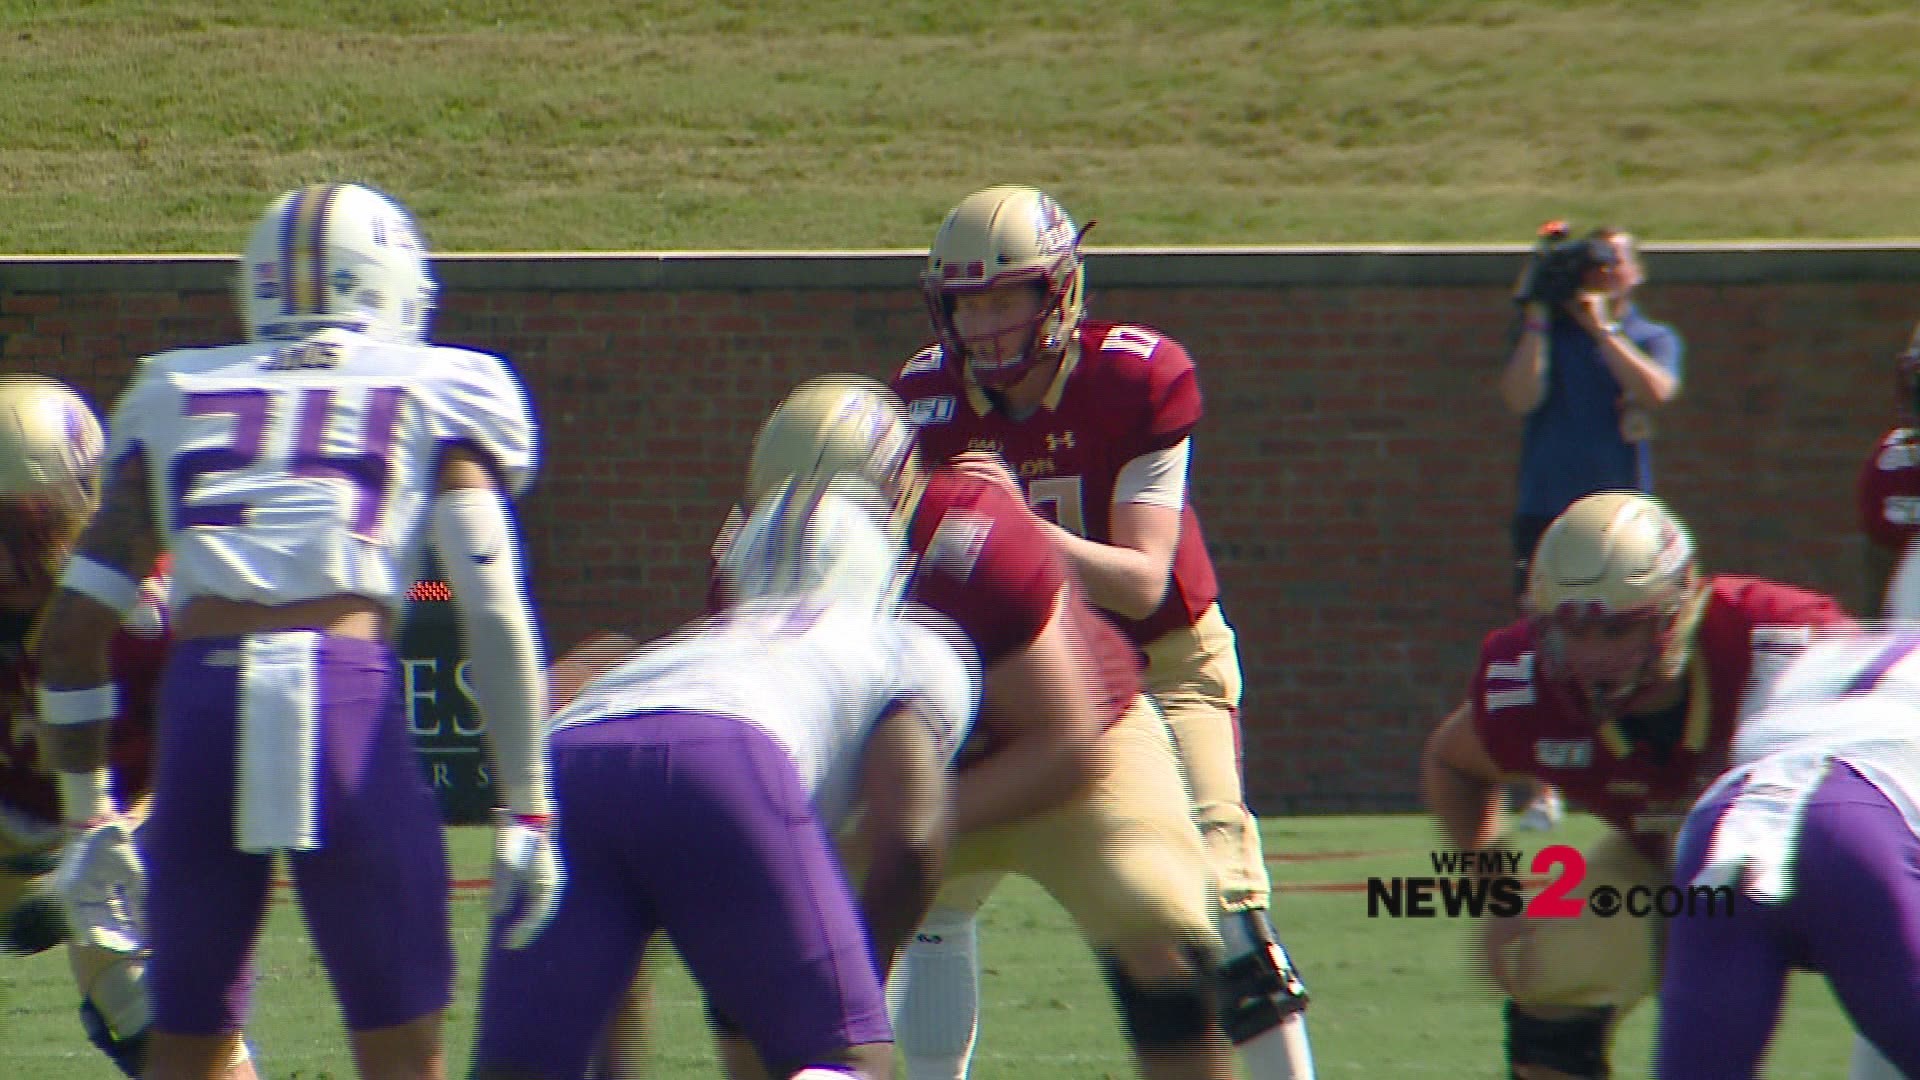 The Dukes rushed for six touchdowns in the 45-10 win.